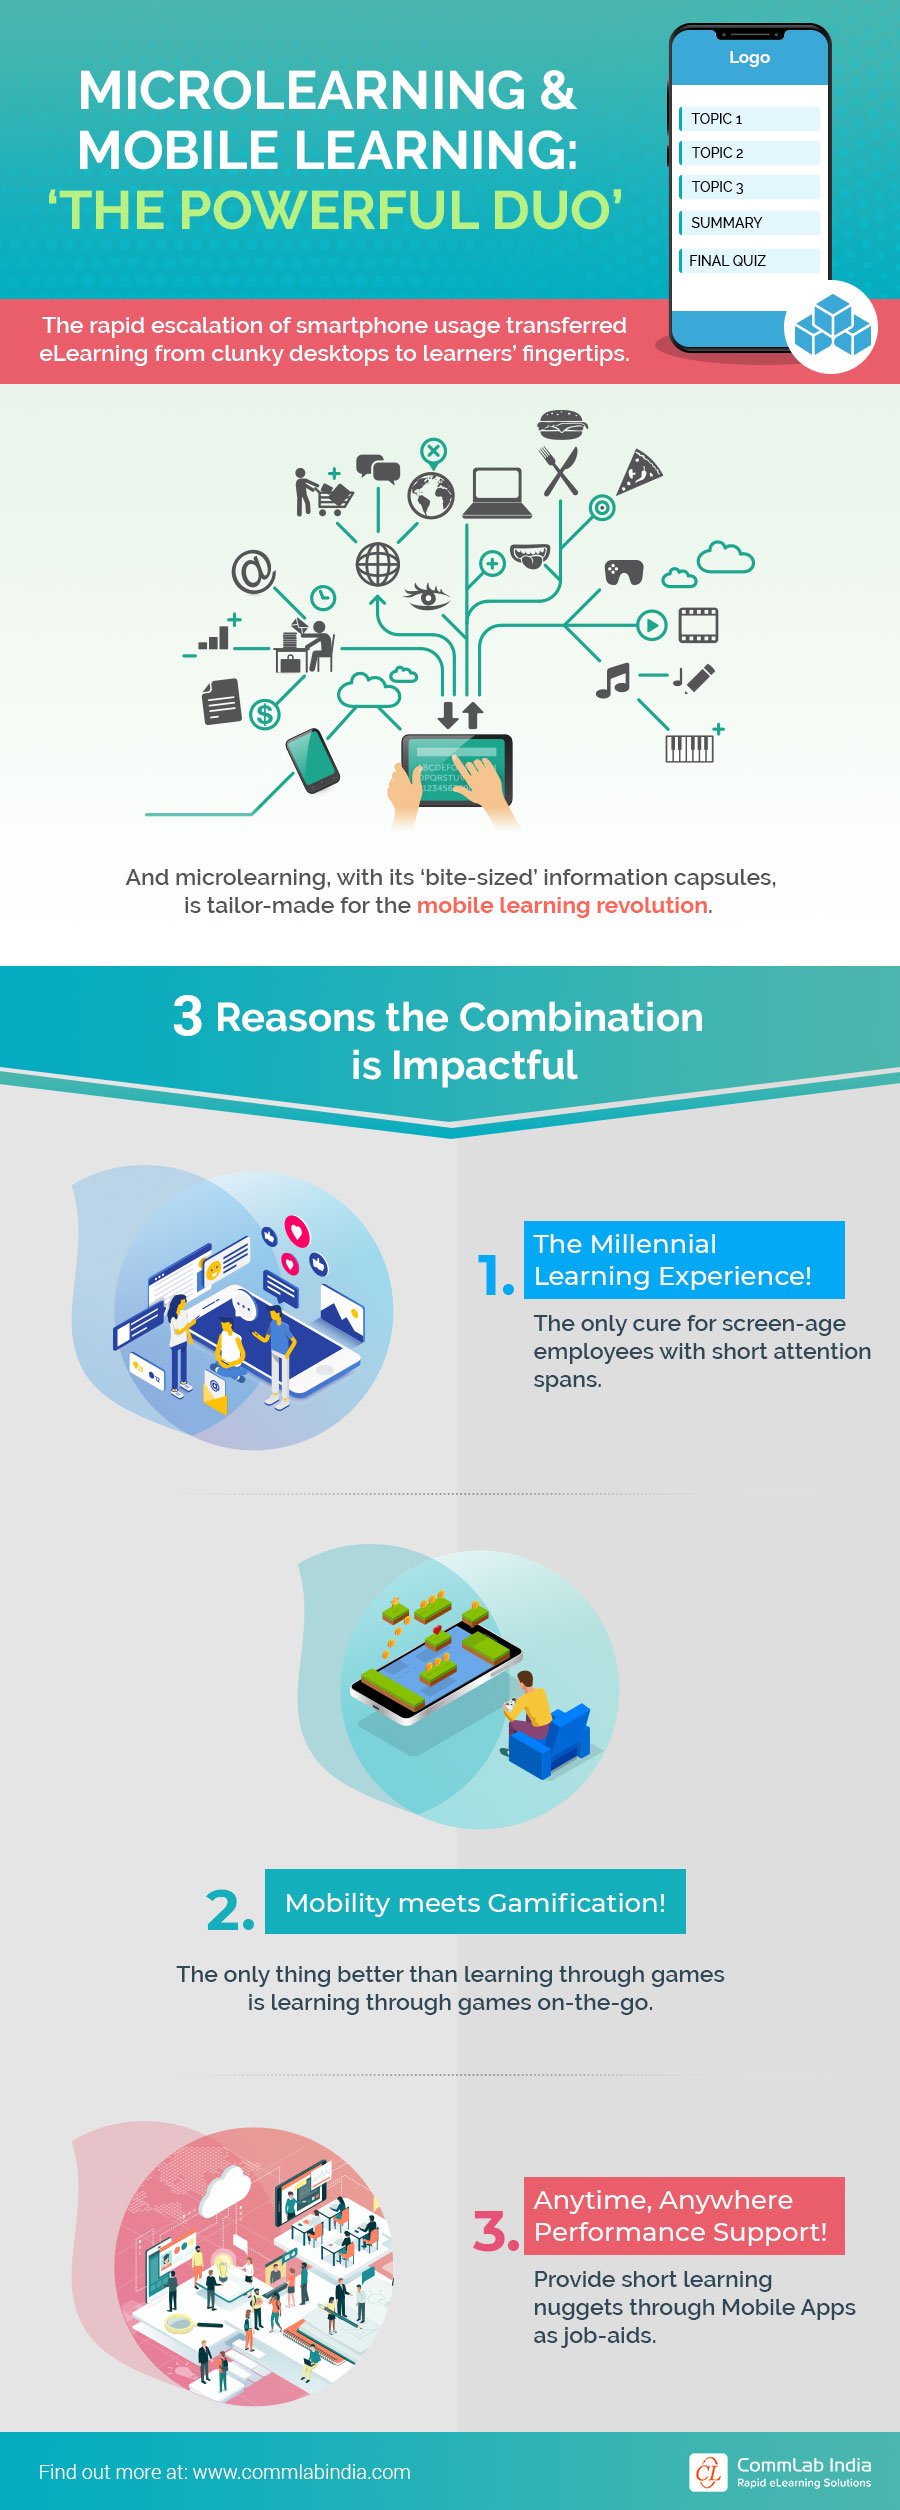 Microlearning and Mobile learning – The Powerful Duo [Infographic]